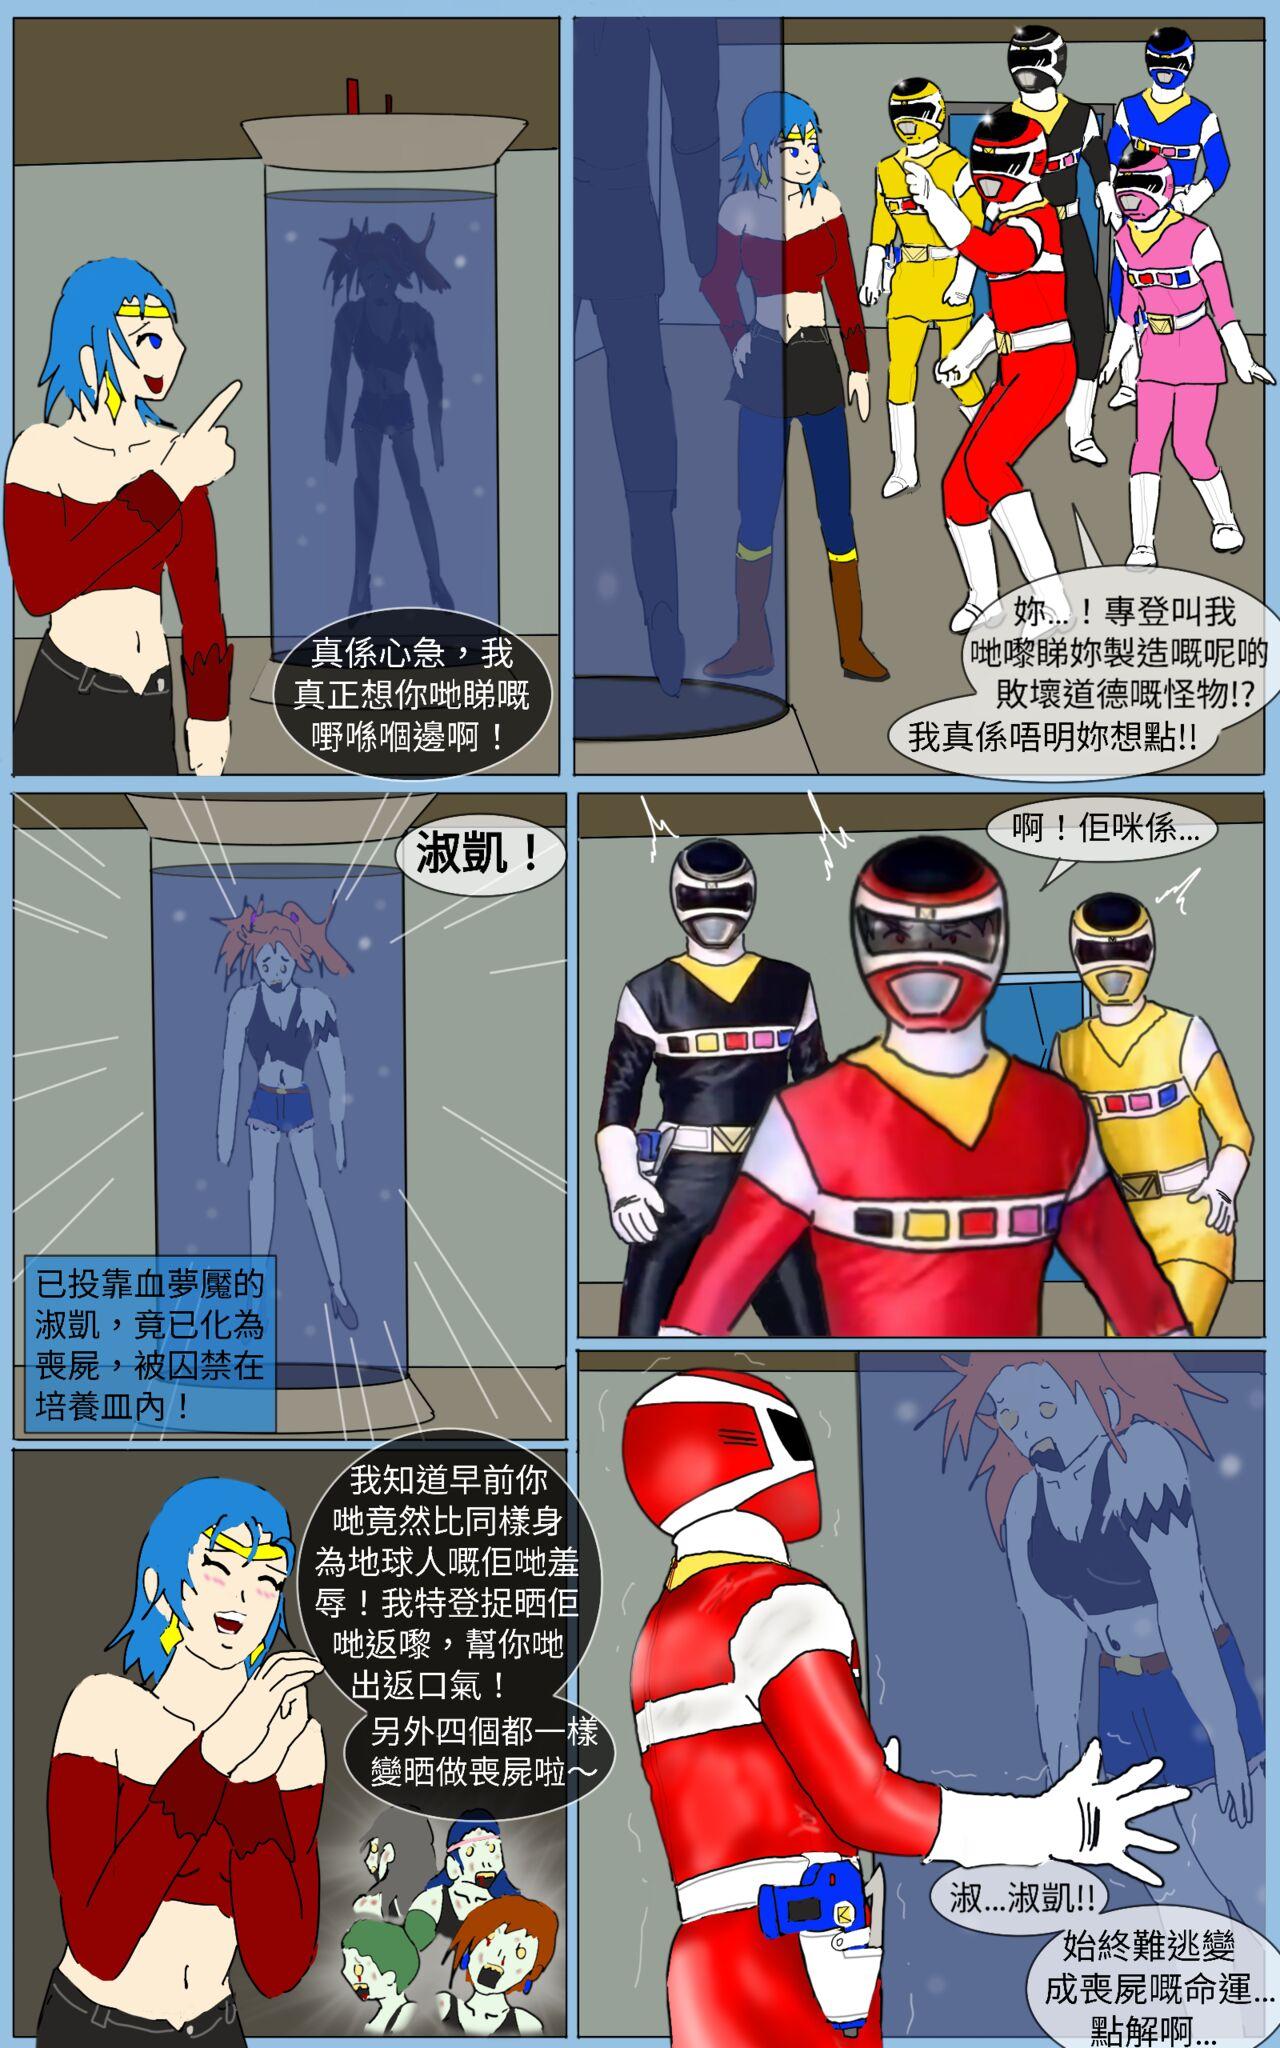 Family Roleplay Mission 32 - Super sentai Mojada - Page 4